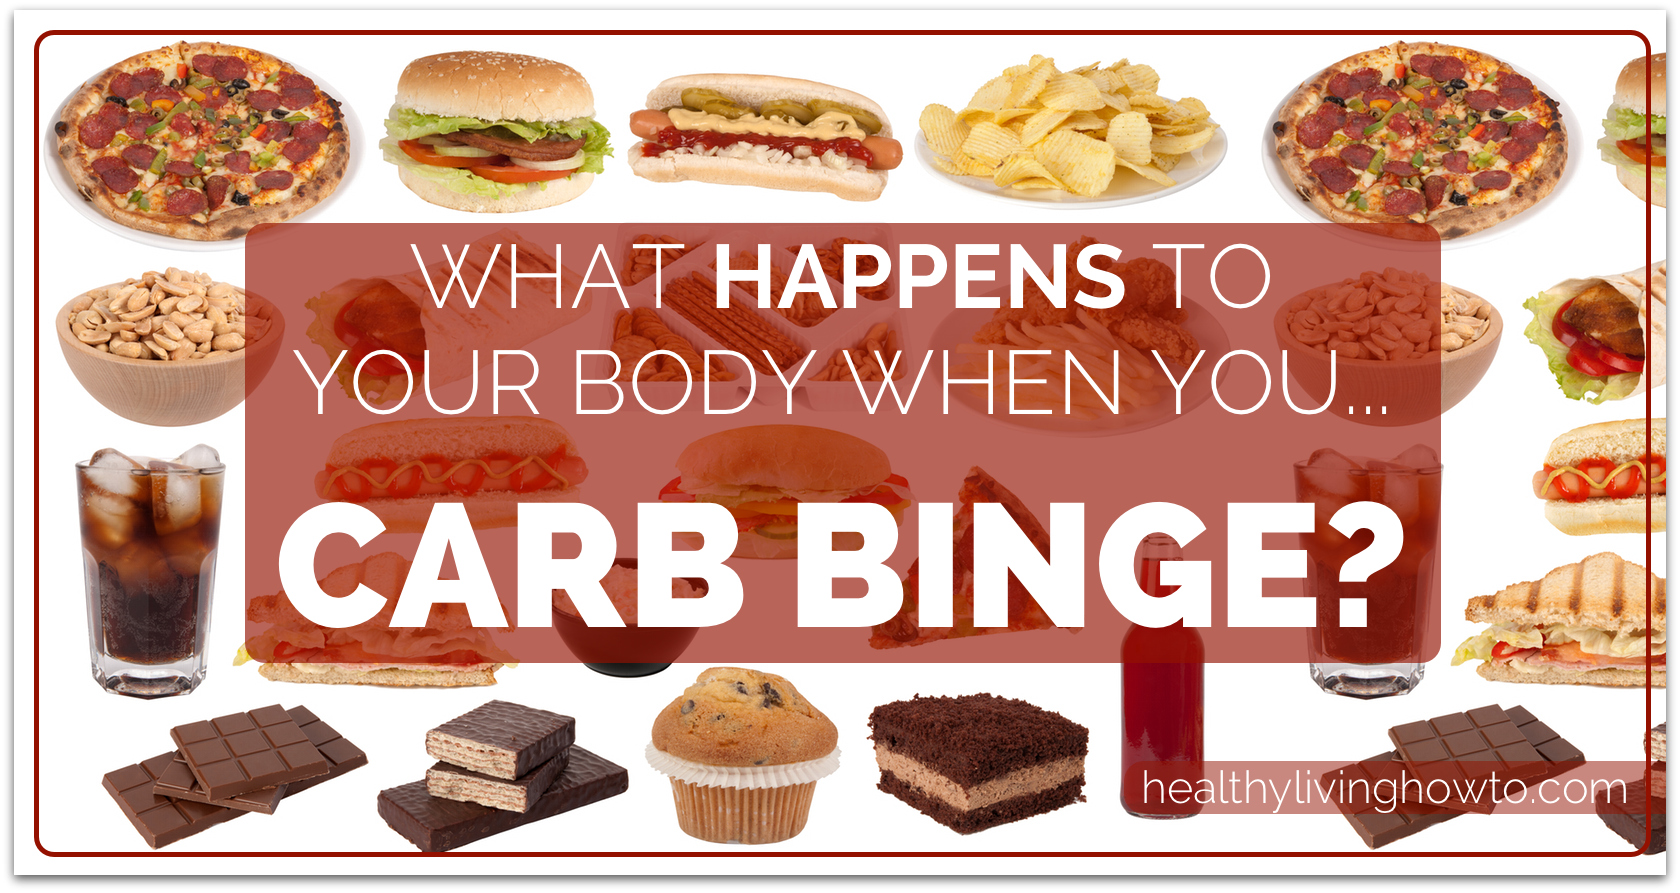 What Happens To Your Body When You Carb Binge? | healthylivinghowto.com